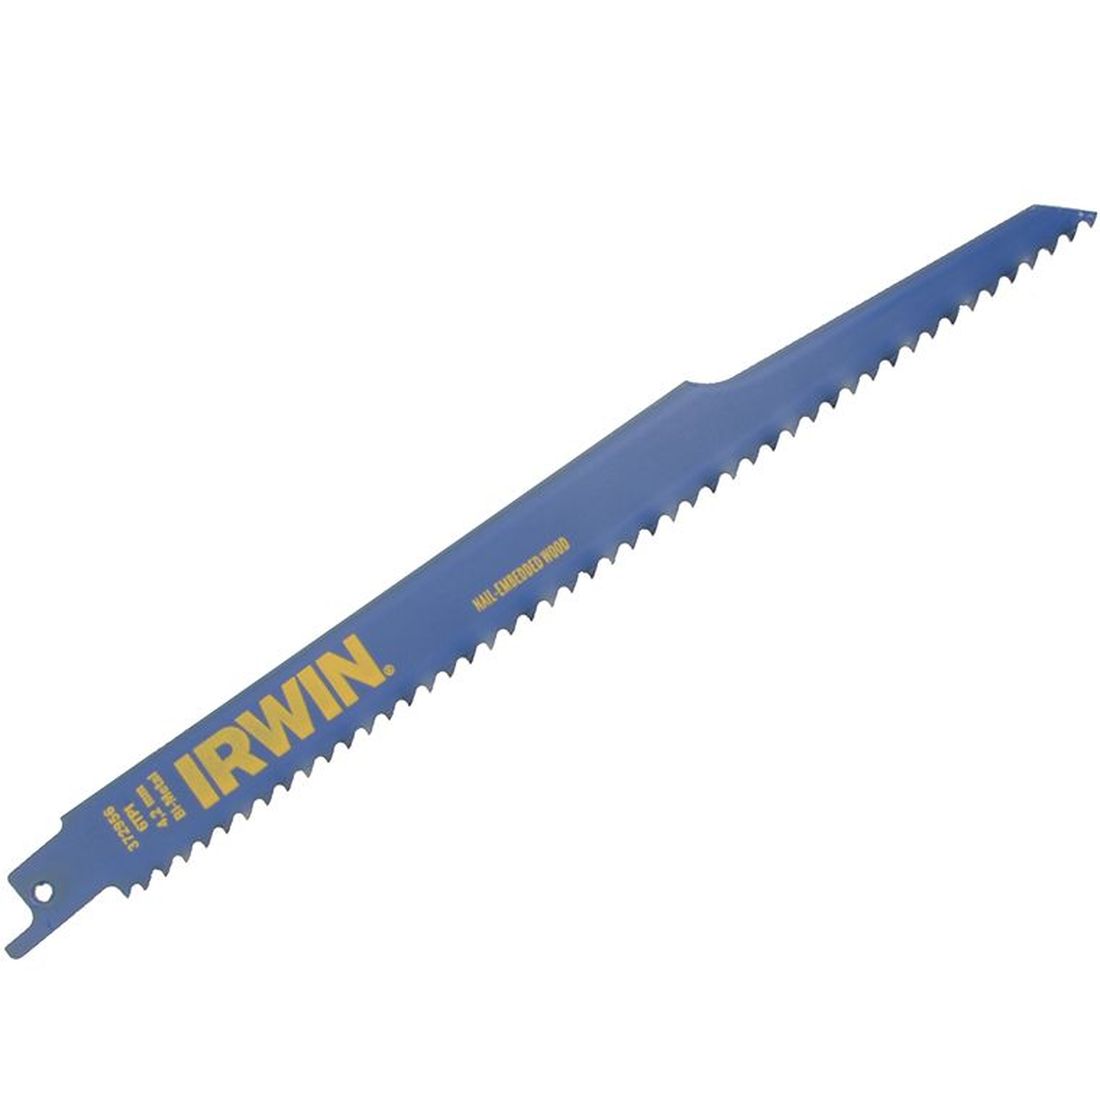 IRWIN Sabre Saw Blade Nail Embedded Wood 956R 225mm Pack of 2                         